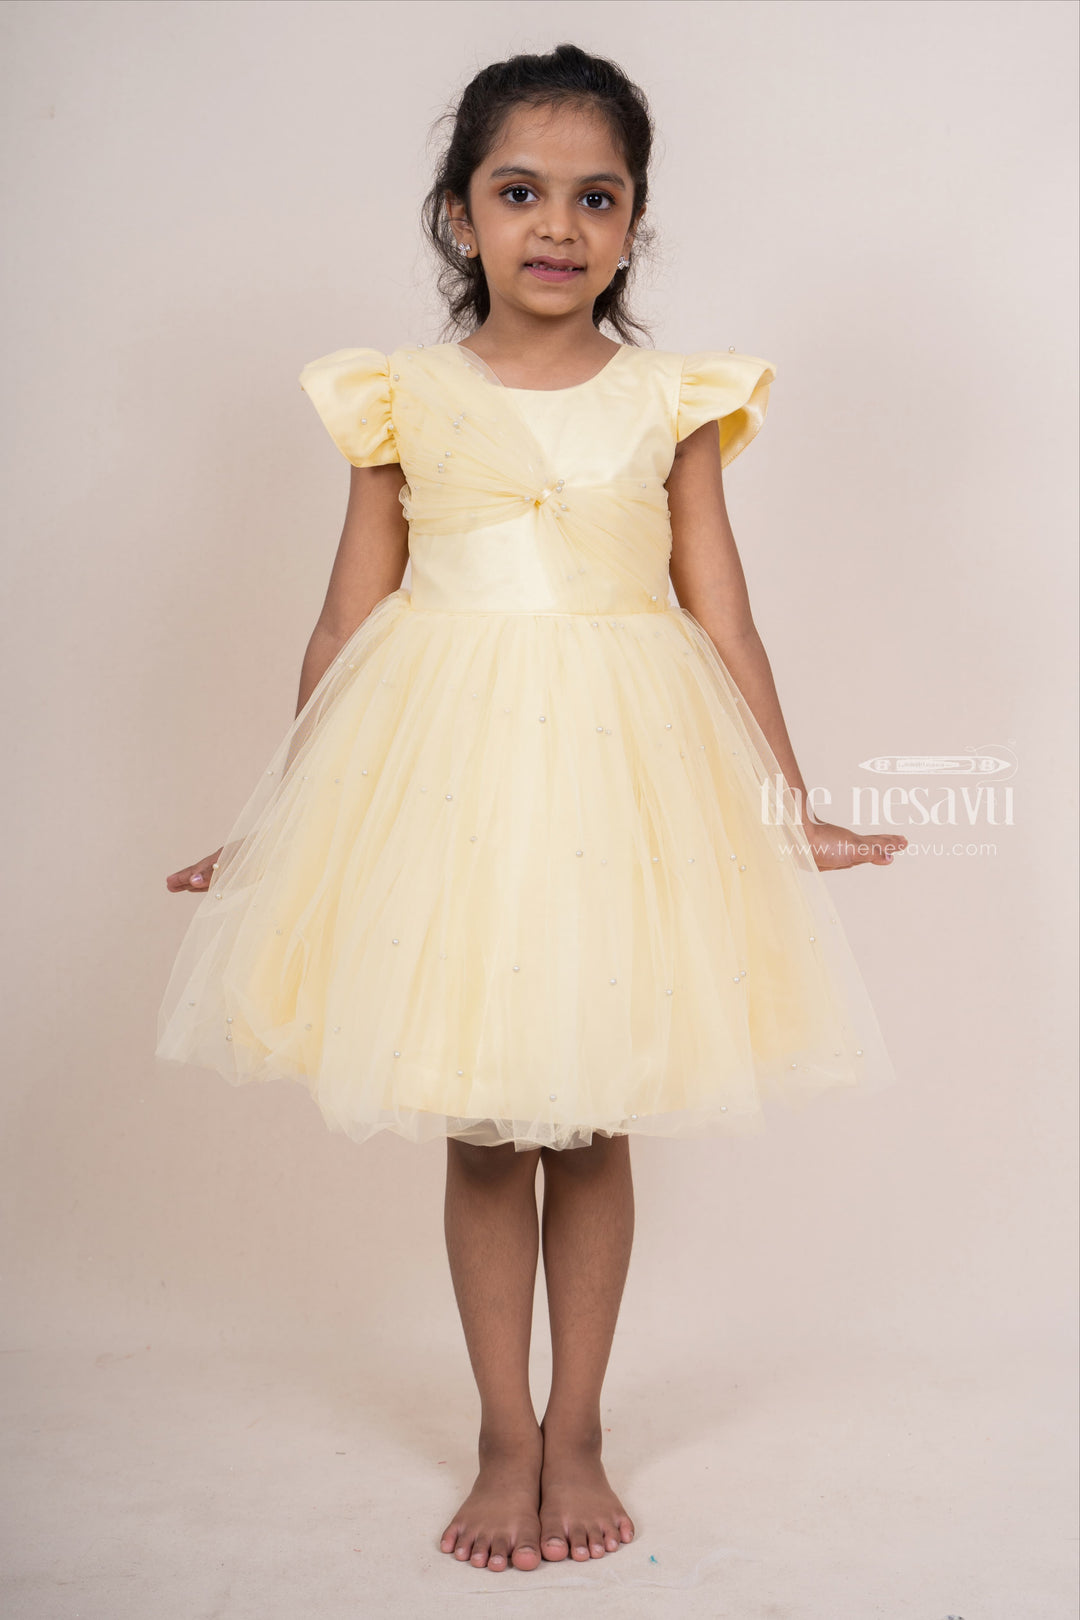 The Nesavu Party Frock Yellow With Bow Trimmed Party Gown For Baby Girls psr silks Nesavu 16 (1Y) / yellow PF81B